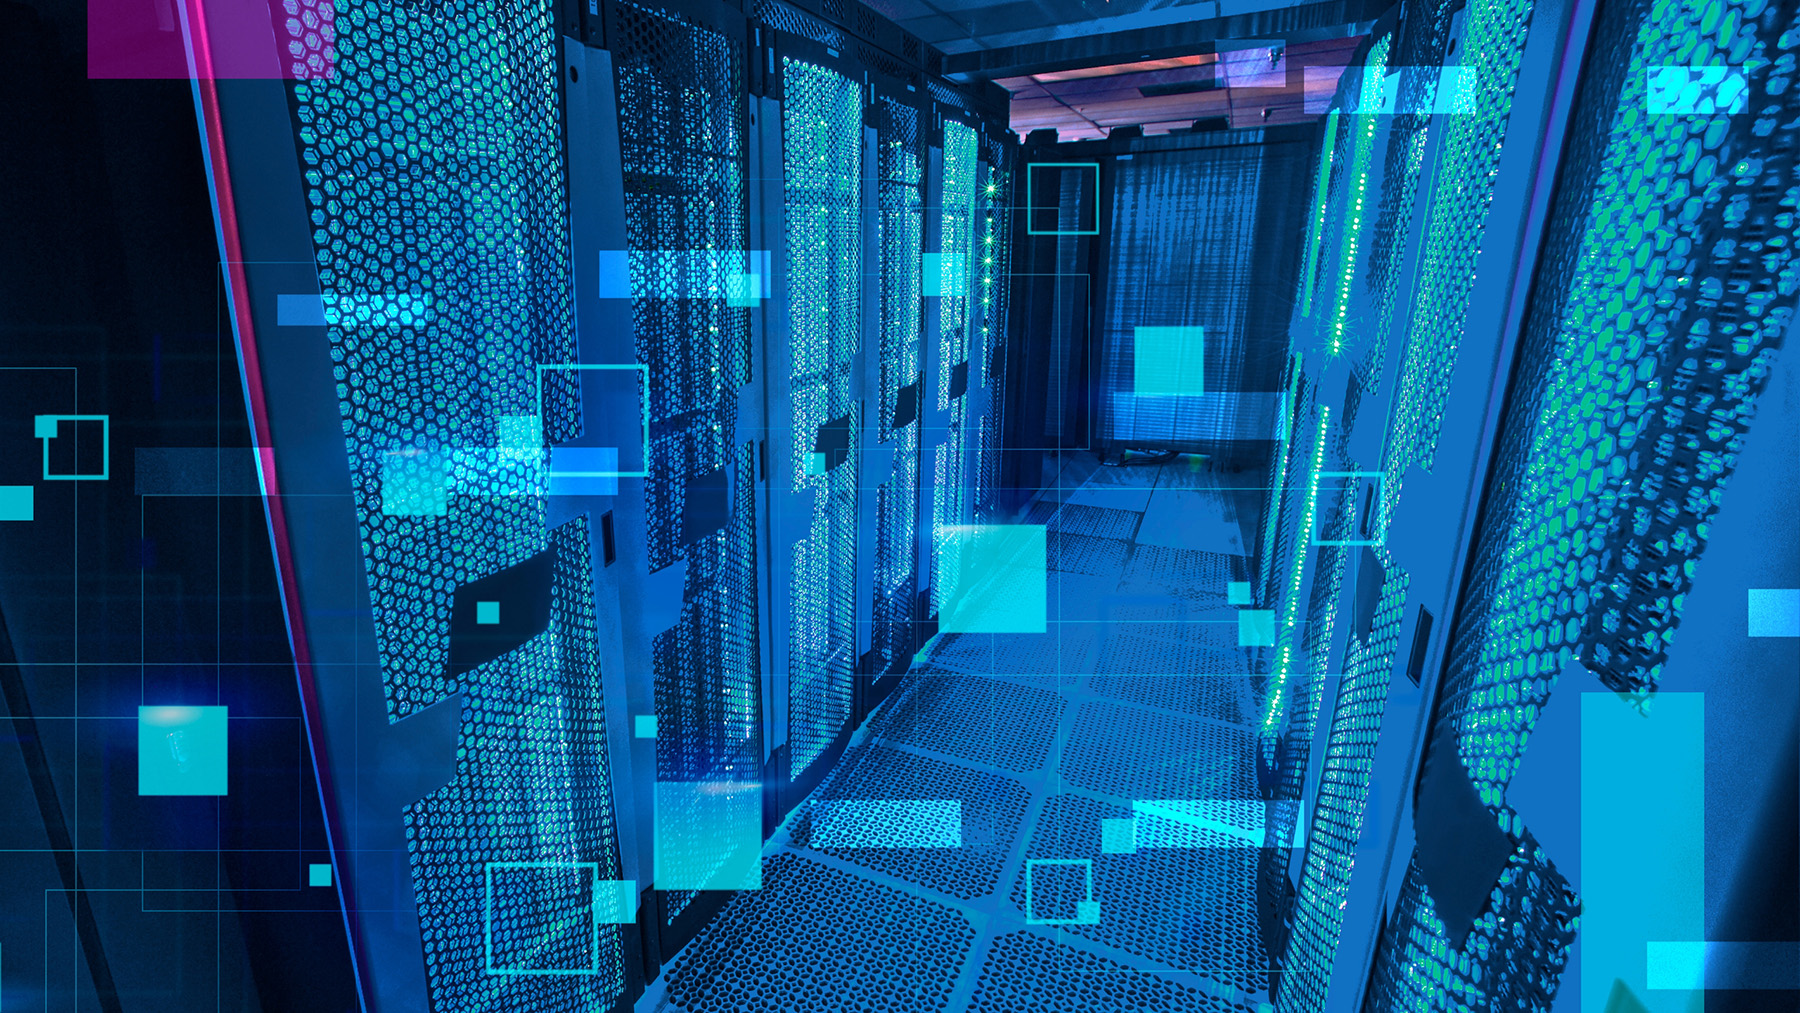 An image of large cyberinfrastructure machines with digital elements indicating technology concepts